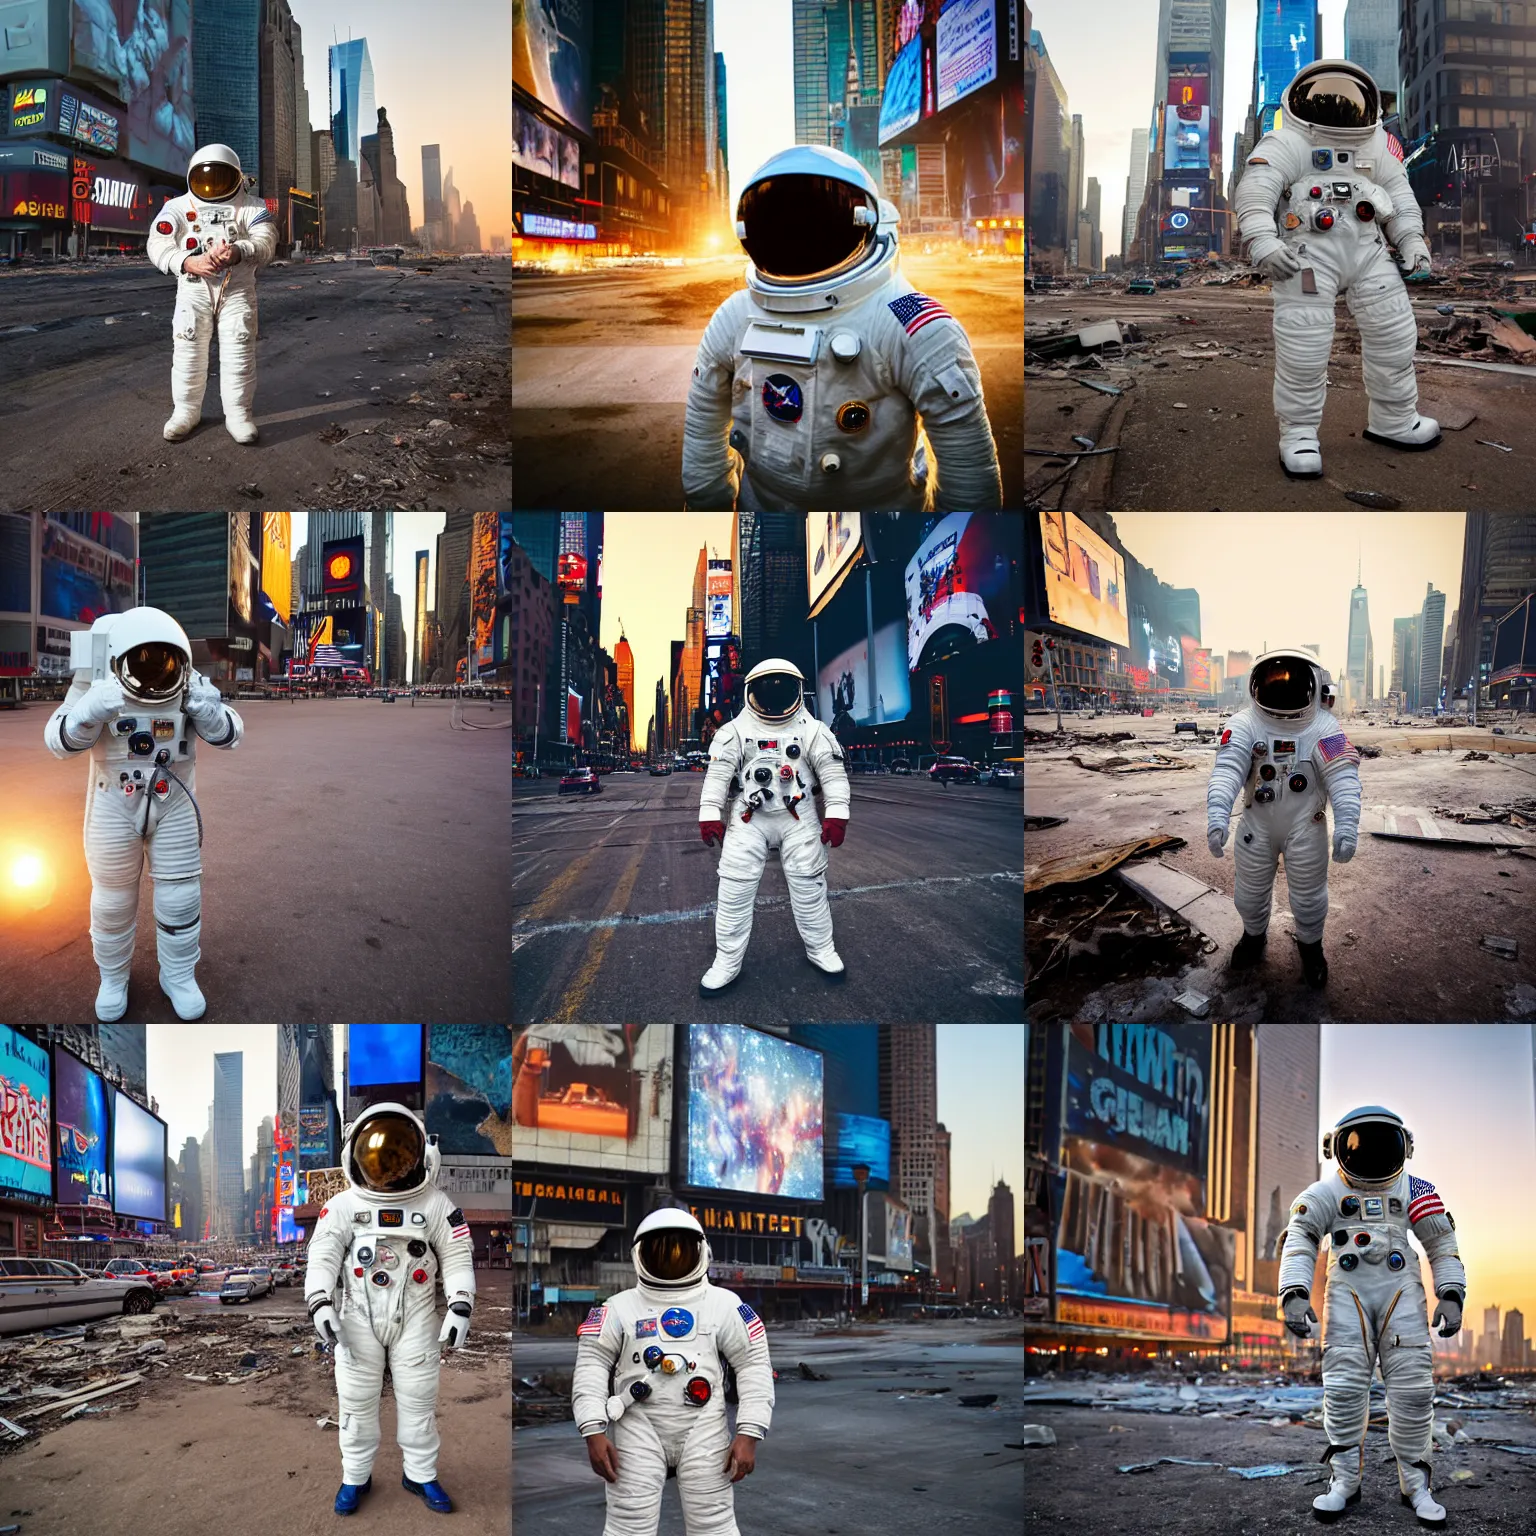 Prompt: american white spacesuit astronaut with oversized helmet in postapocalyptic abandoned destroyed times square, destroyed buildings, 4 0 0 mm, bokeh, sunrise, by steve mccurry, by nasa